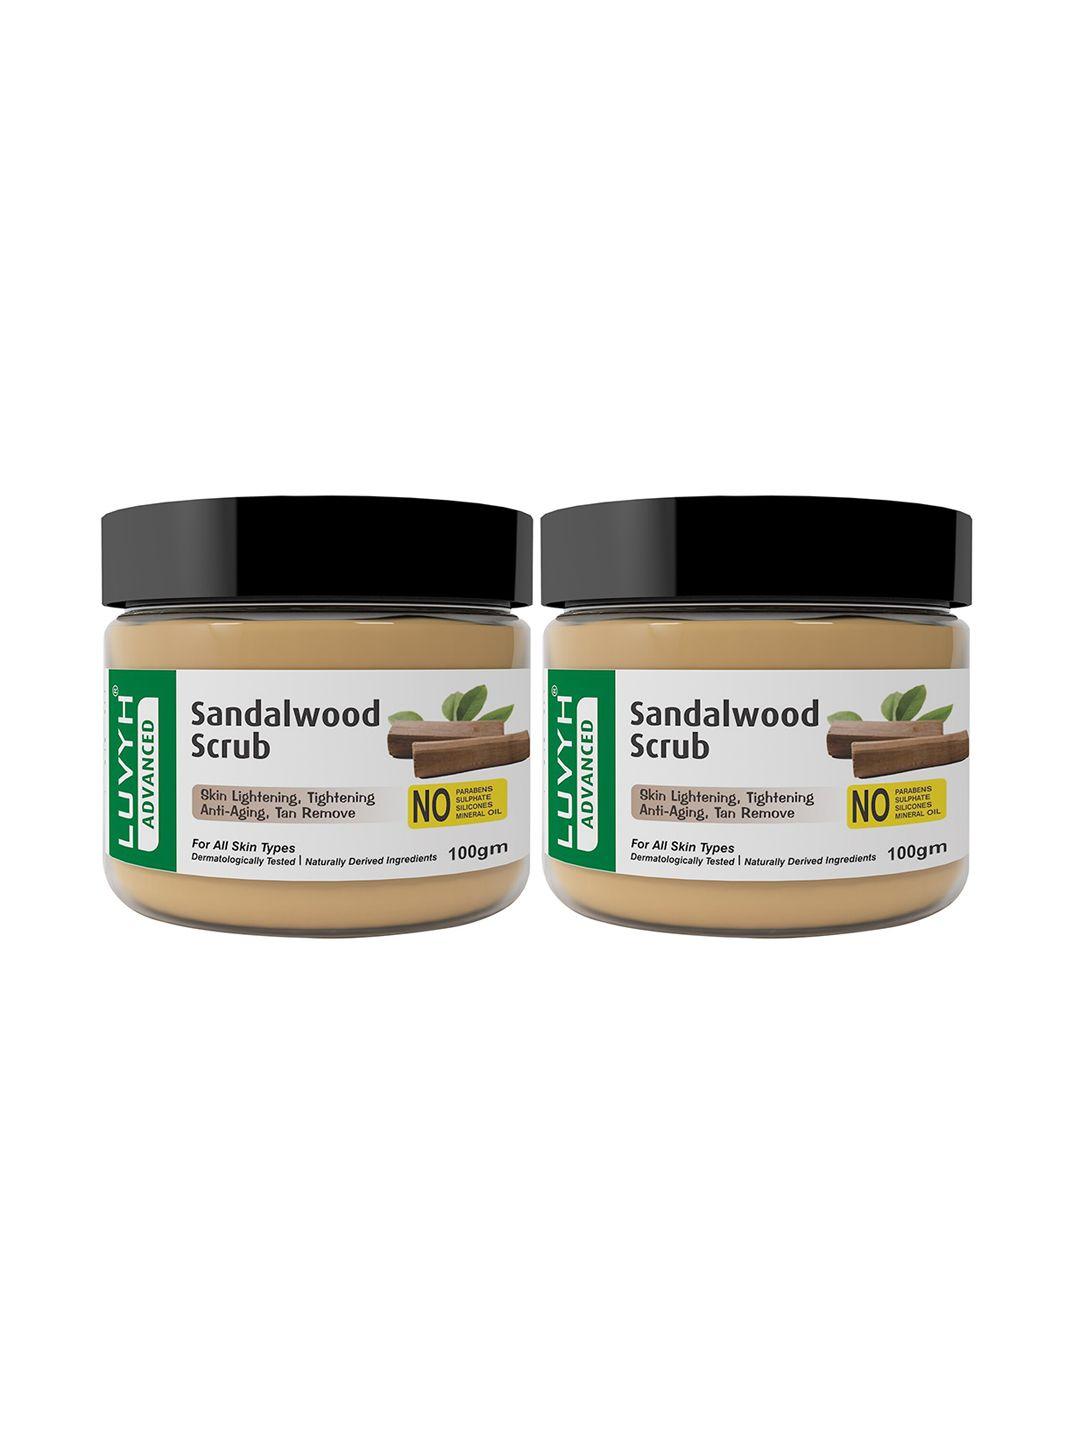 luvyh advanced set of 2 sandalwood scrubs for anti-aging & tan removal - 100 g each